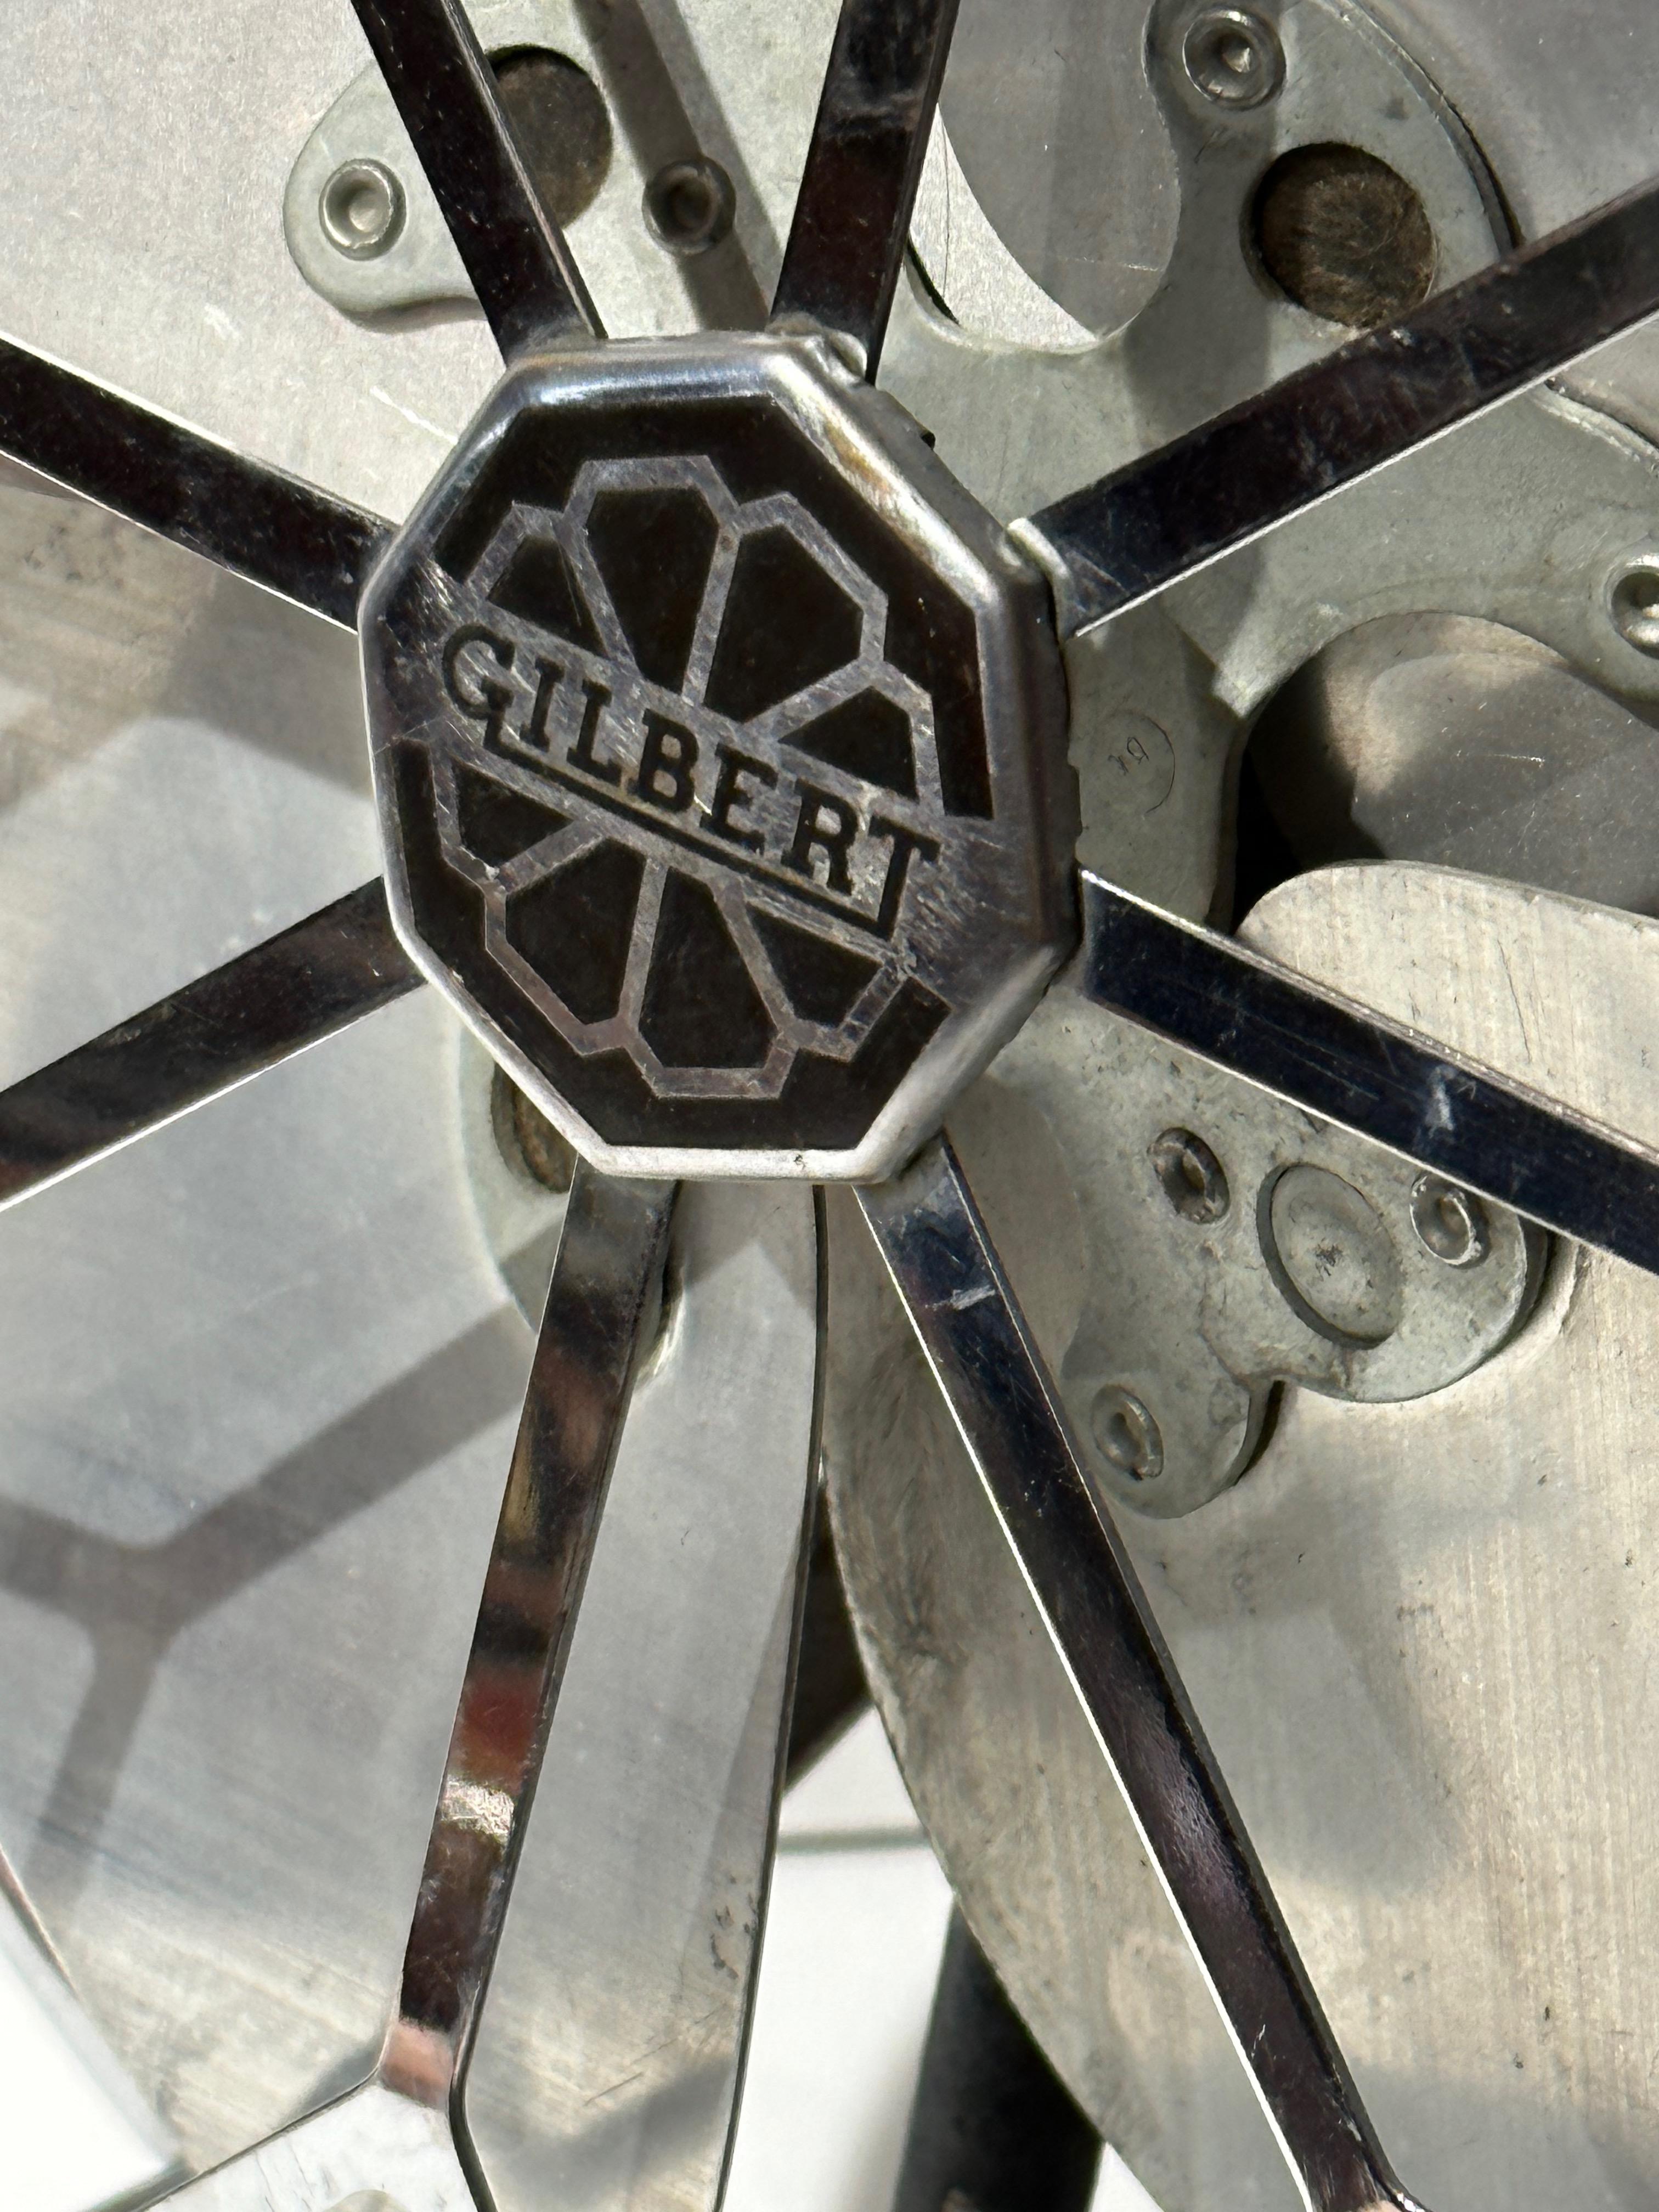 A 1930s Gilbert brand electric fan – this is the “Aristocrat” model with its floral shaped cage that echoes the floral shaped logo medallion in the center. It has Aluminum blades, a black base, and an unusual plug with two “finger holes” for an easy